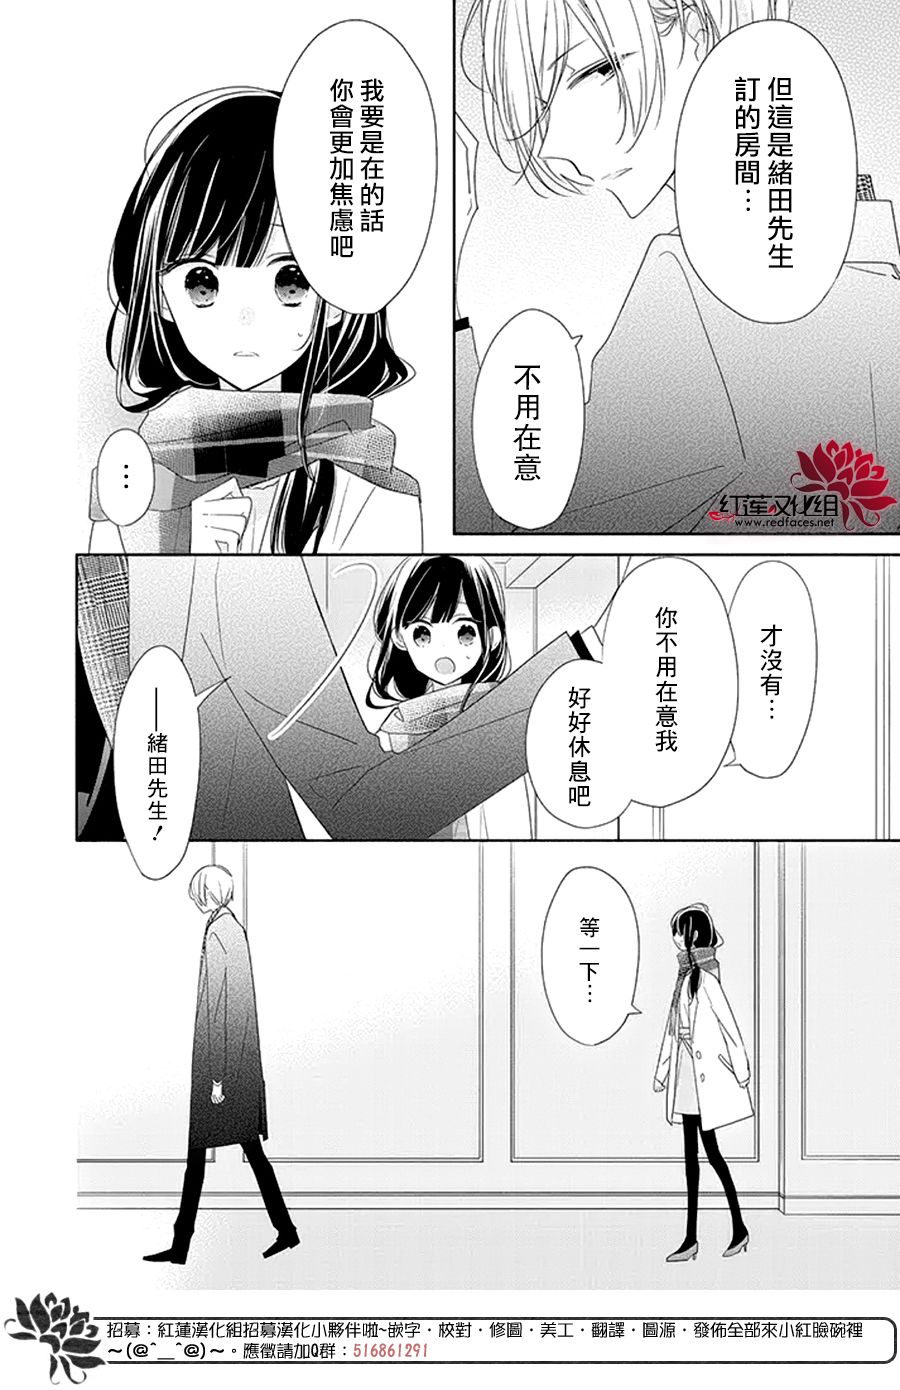 If given a second chance - 21話 - 4